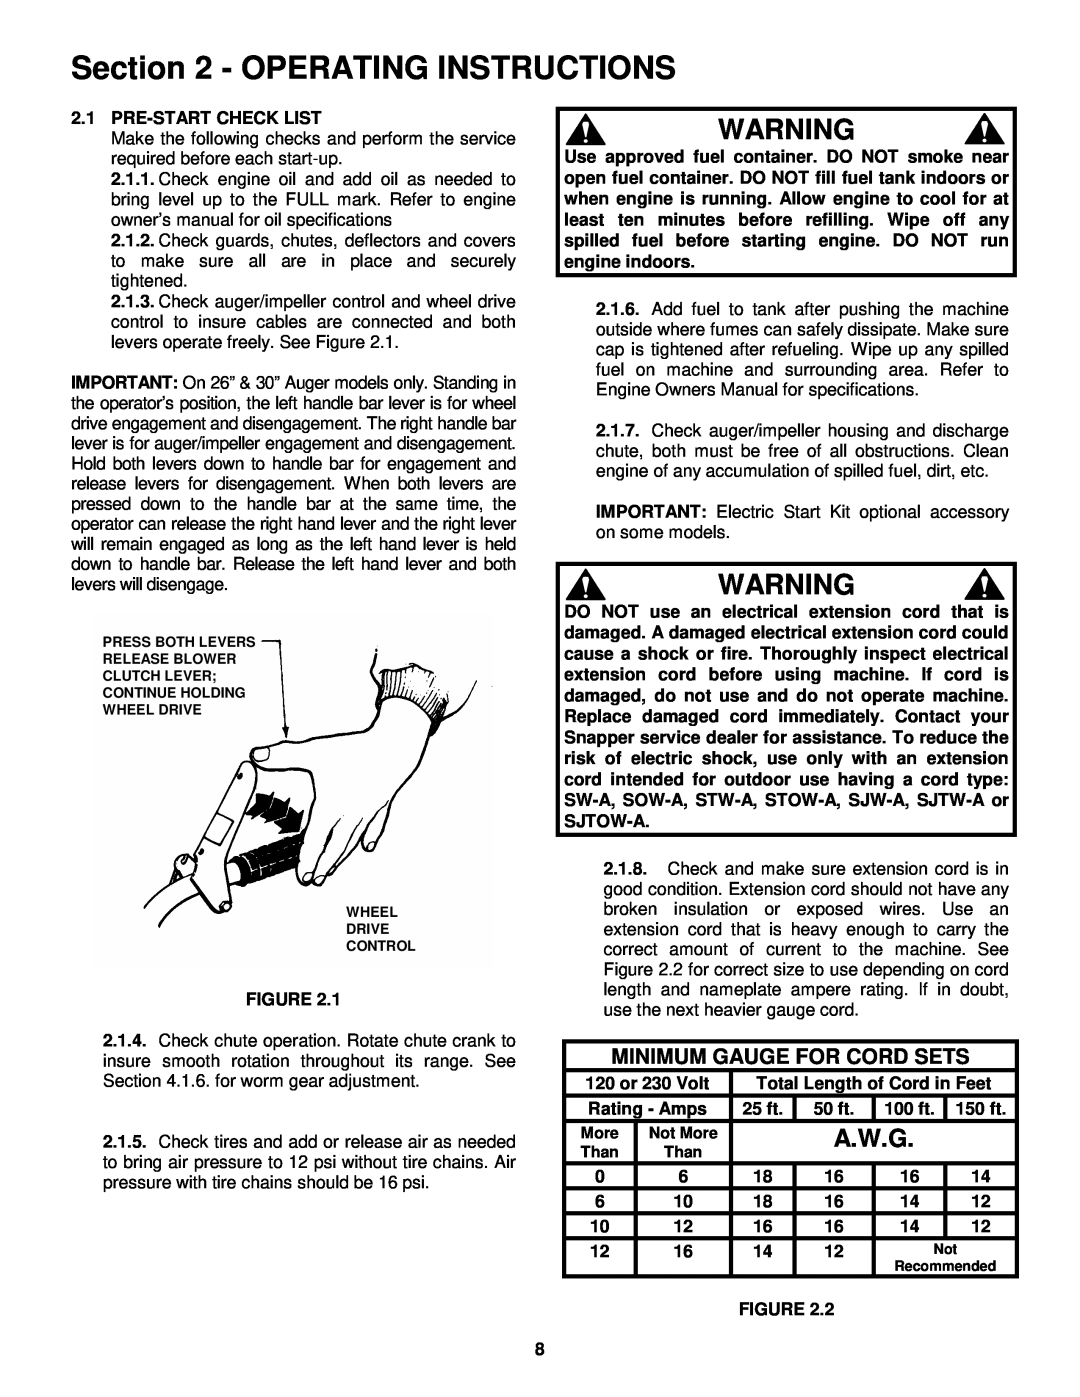 Snapper E9265, E11305 important safety instructions A.W.G, Operating Instructions, Minimum Gauge For Cord Sets 